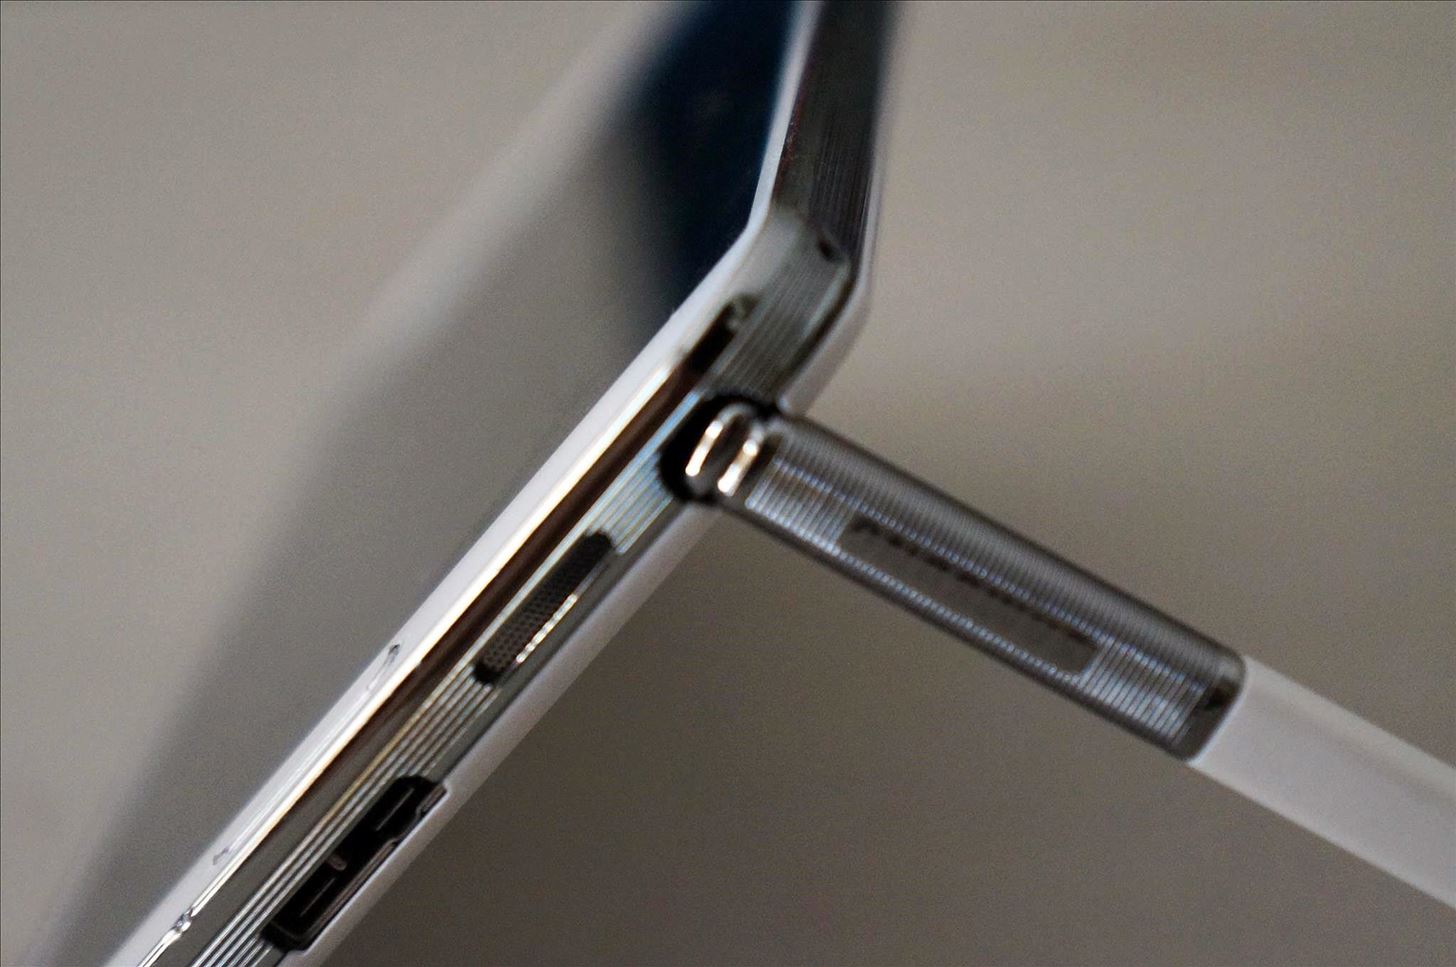 Attention: Your Galaxy Note 3's S Pen Works as a Built-in Kickstand